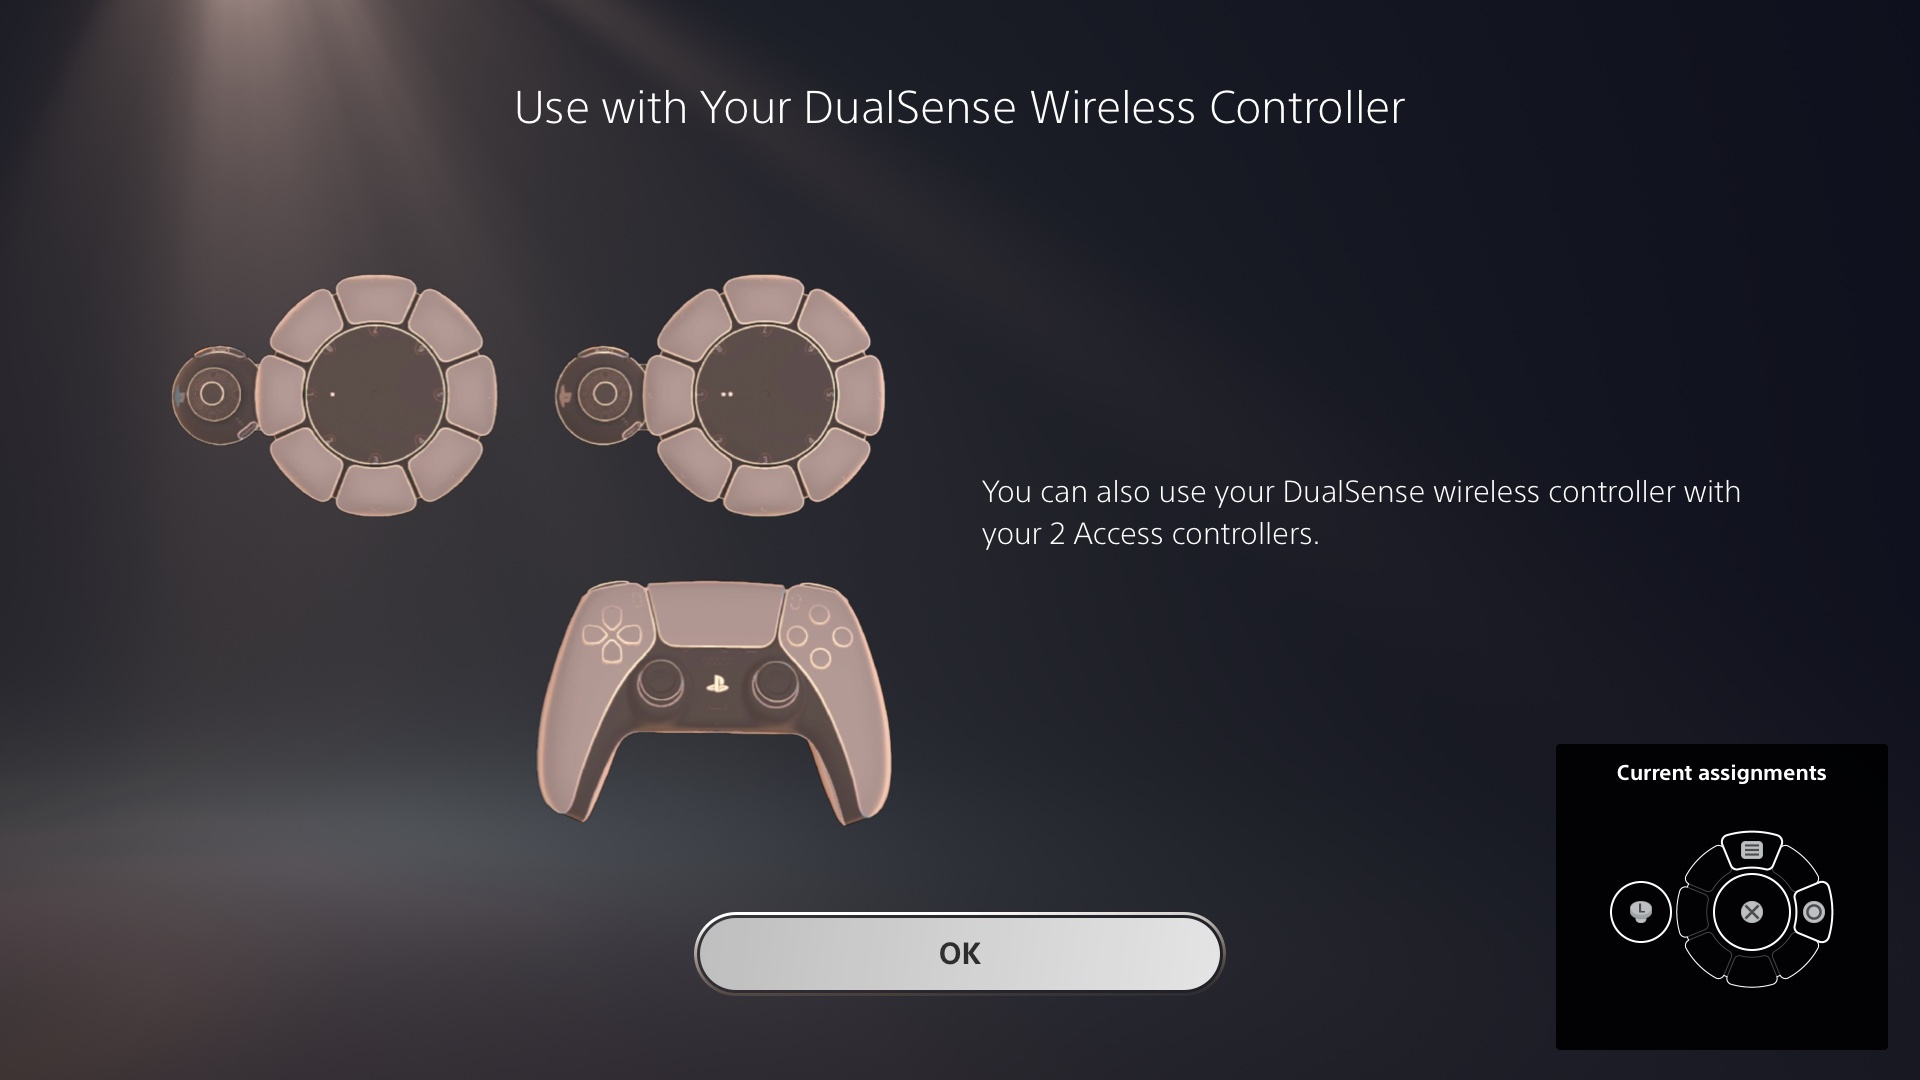  "Image of the access controller user interface showing the ability to combine two access controllers with a DualSense controller"